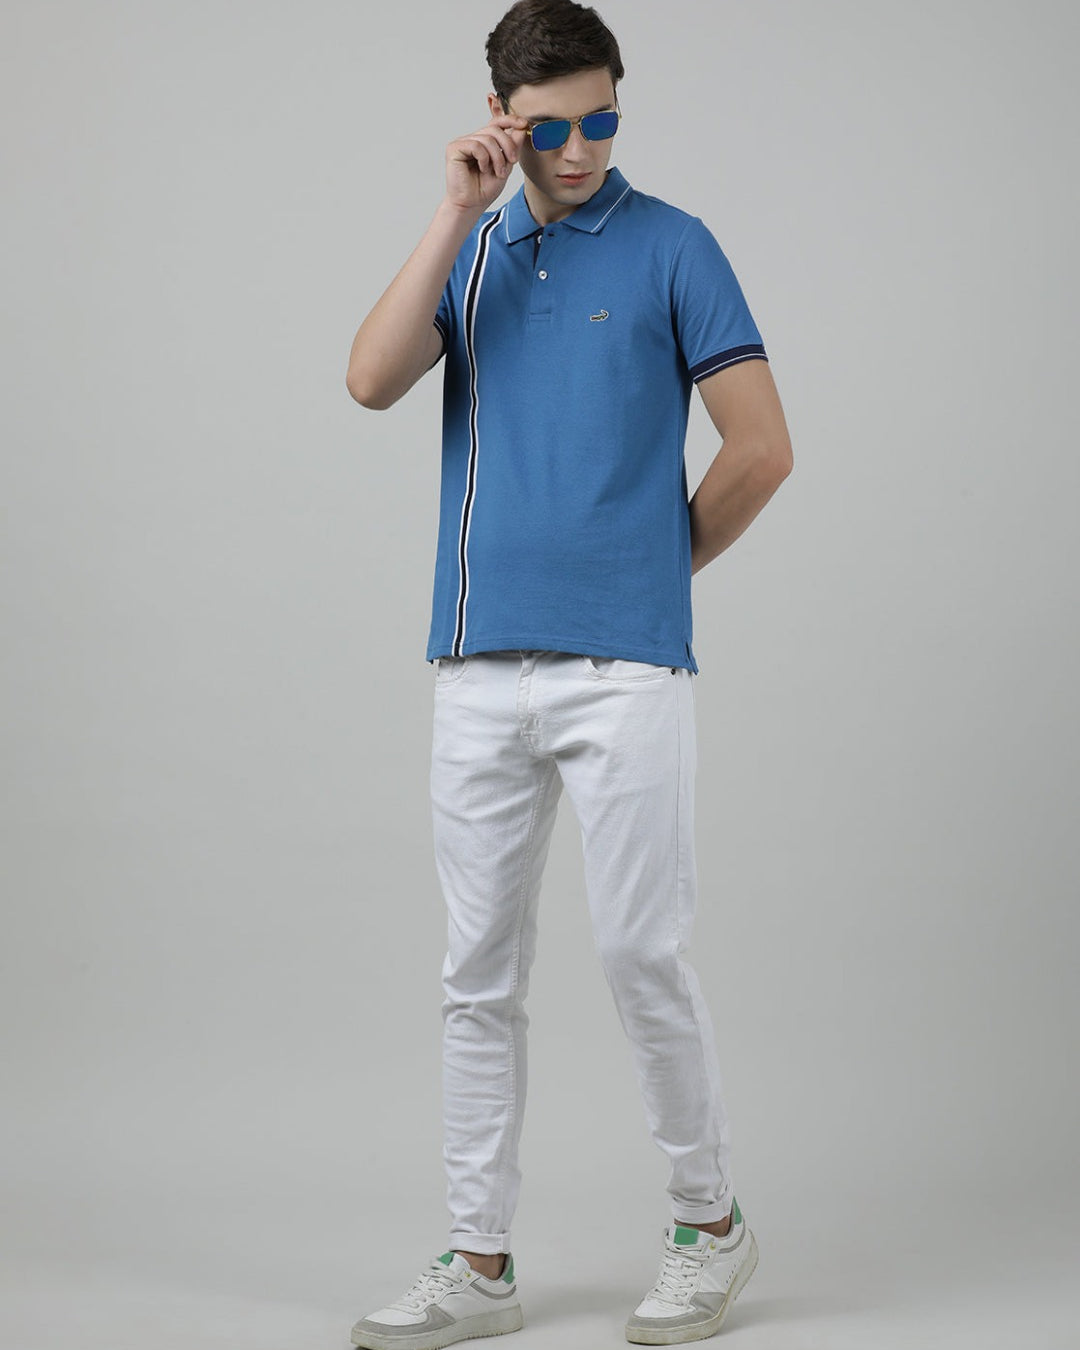 Crocodile Casual Blue Solid Polo T-Shirt Half Sleeve Slim Fit with Collar for Men